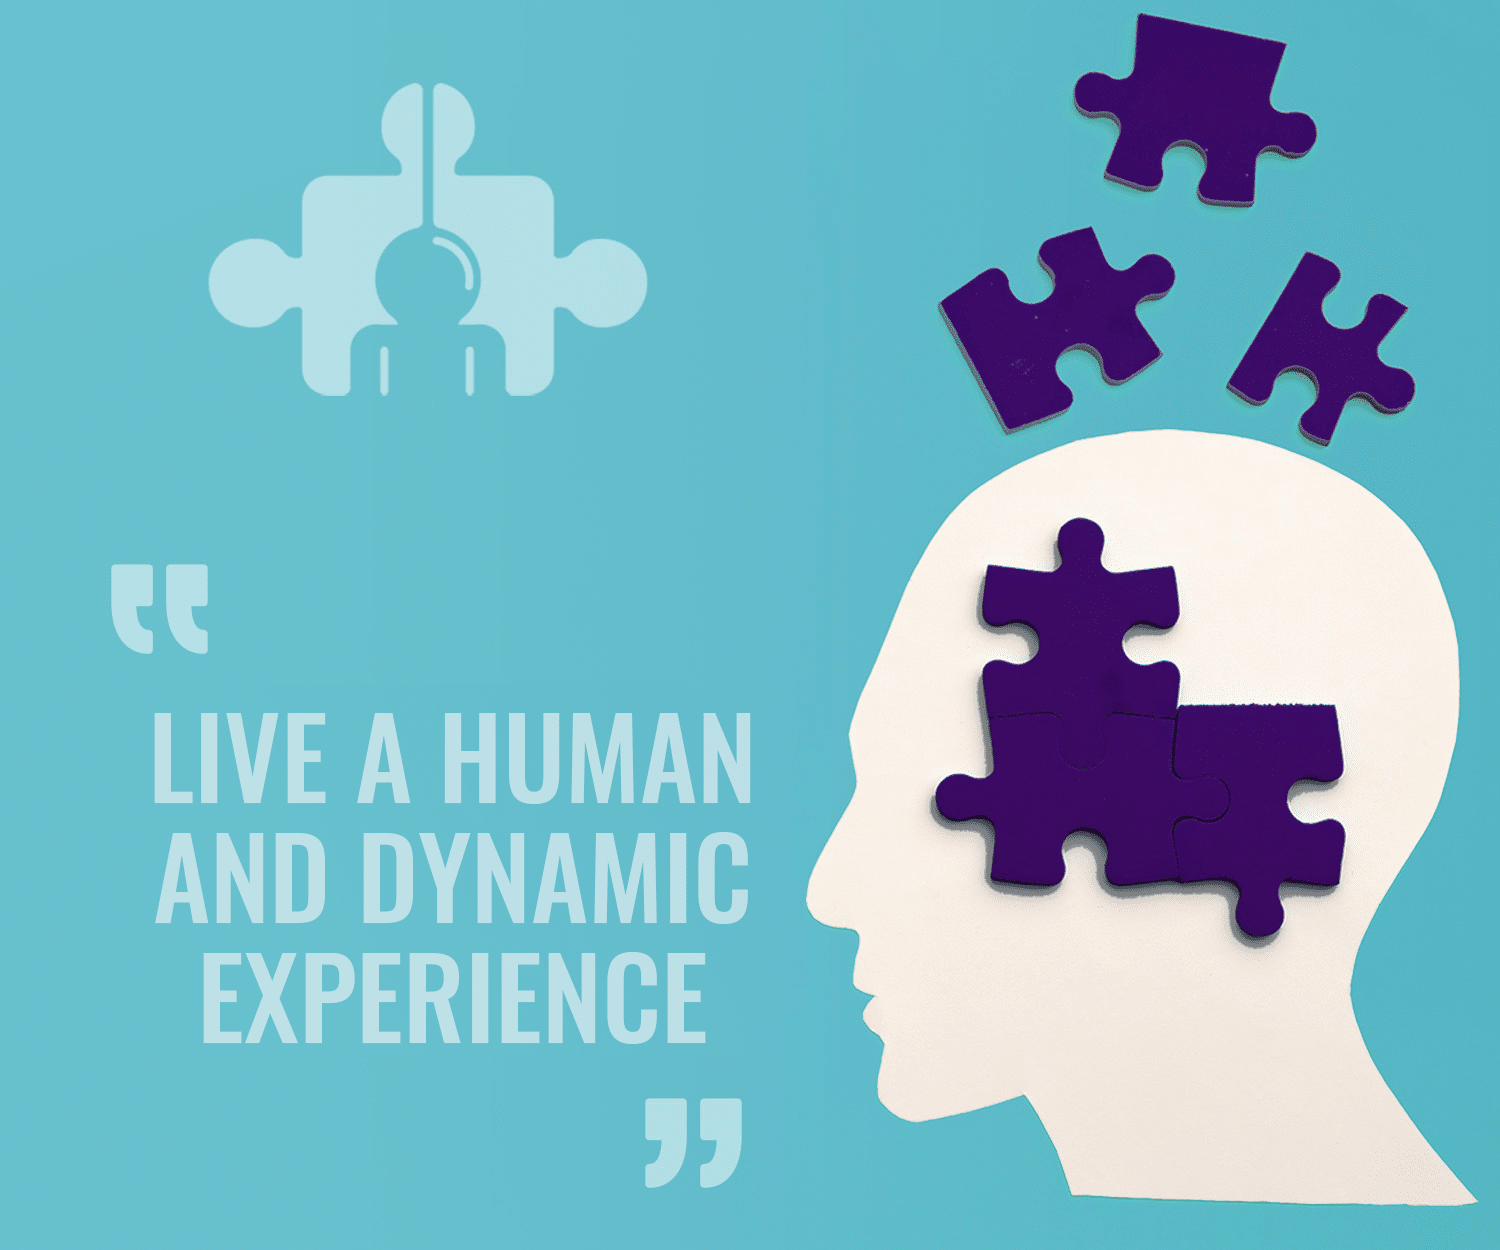 Live a dynamic and human experience